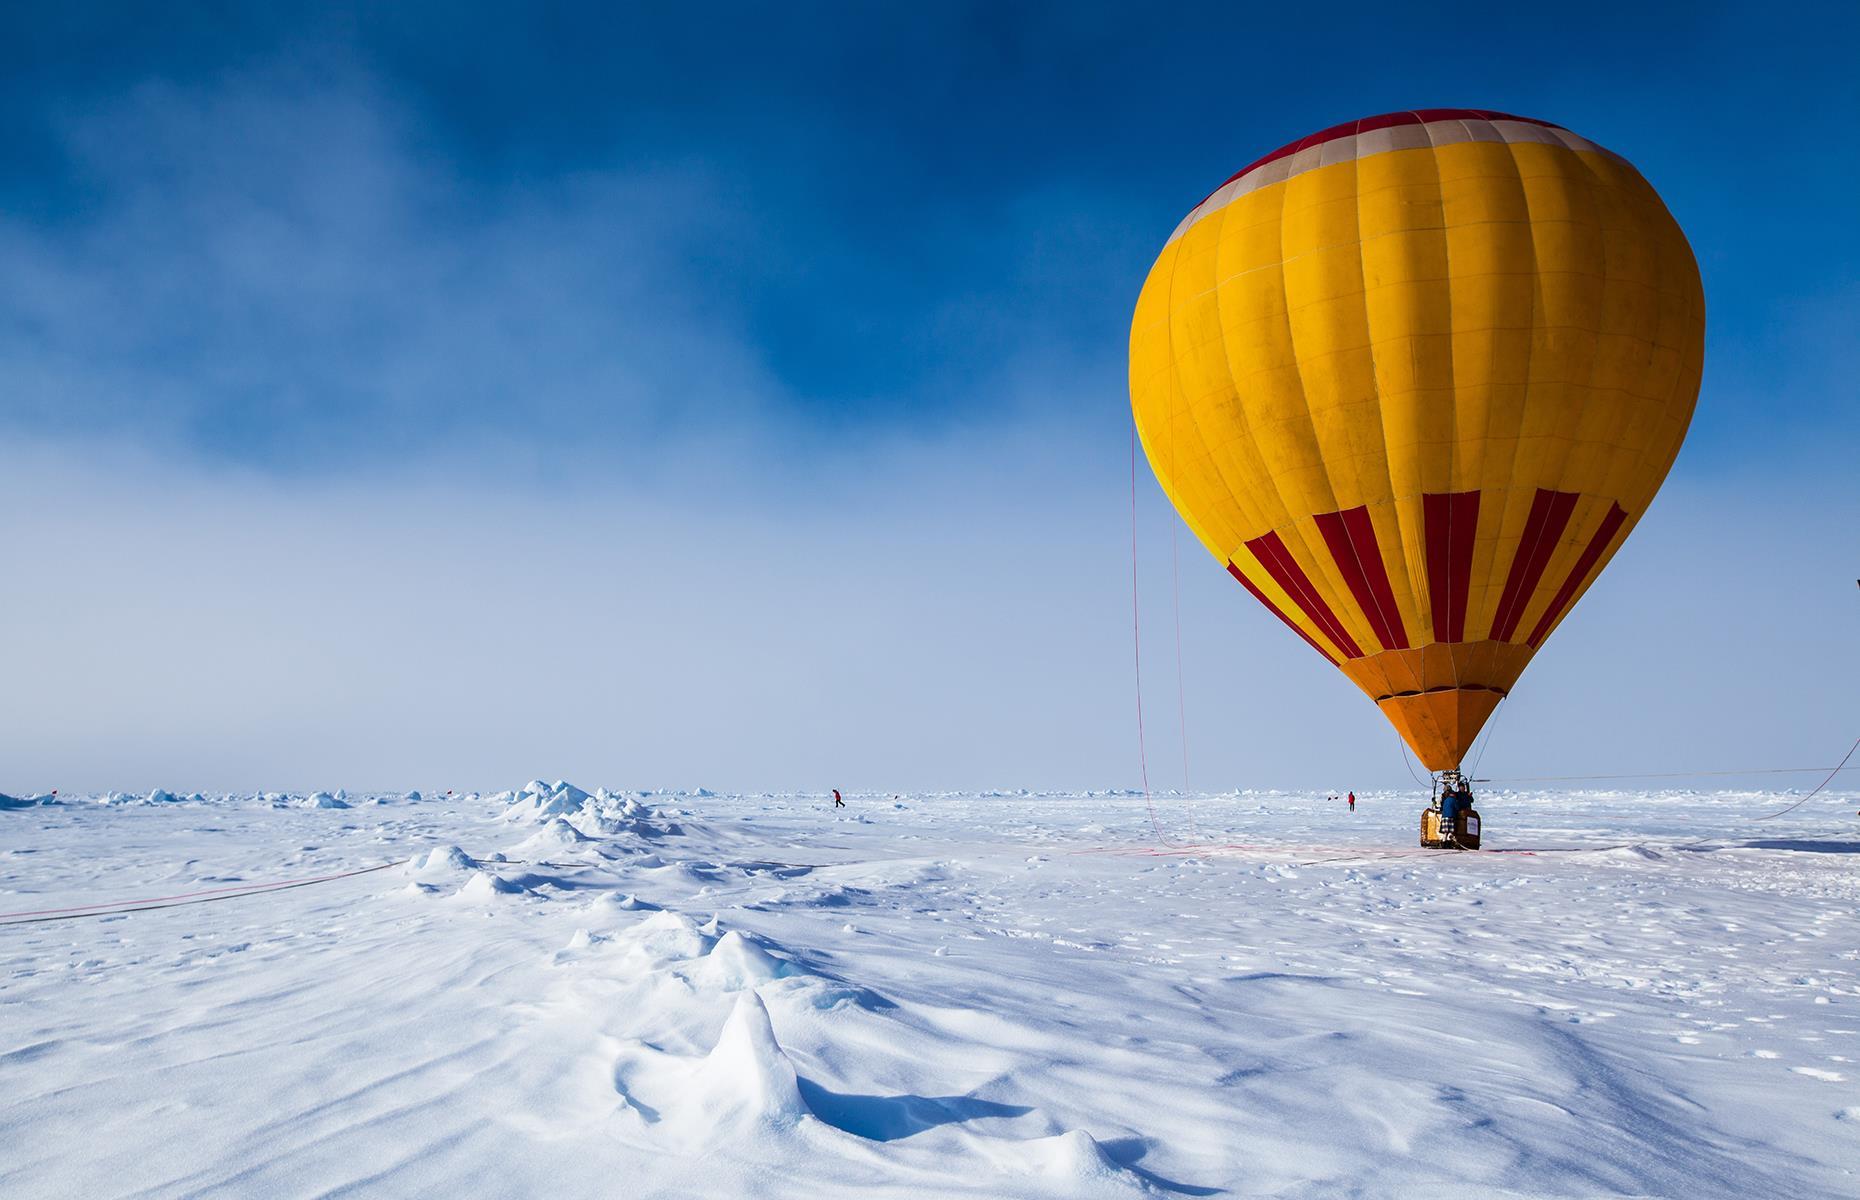 <p>For extreme adventurers, hot air ballooning in the North Pole has an added challenge: getting there. Whether you decide to take the long, cold, arduous trek or take the easier route via helicopter, the journey is all part of the fun. Once you find yourself at 90-degrees north, jump in <a href="https://www.quarkexpeditions.com/gb/arctic/adventure-options/hot-air-ballooning-0">Quark Expeditions</a>' hot air balloon to admire the top of the world from above. A white expanse will slope away beneath you as the balloon climbs and you'll really get a whole new perspective on the vast, white Arctic.</p>